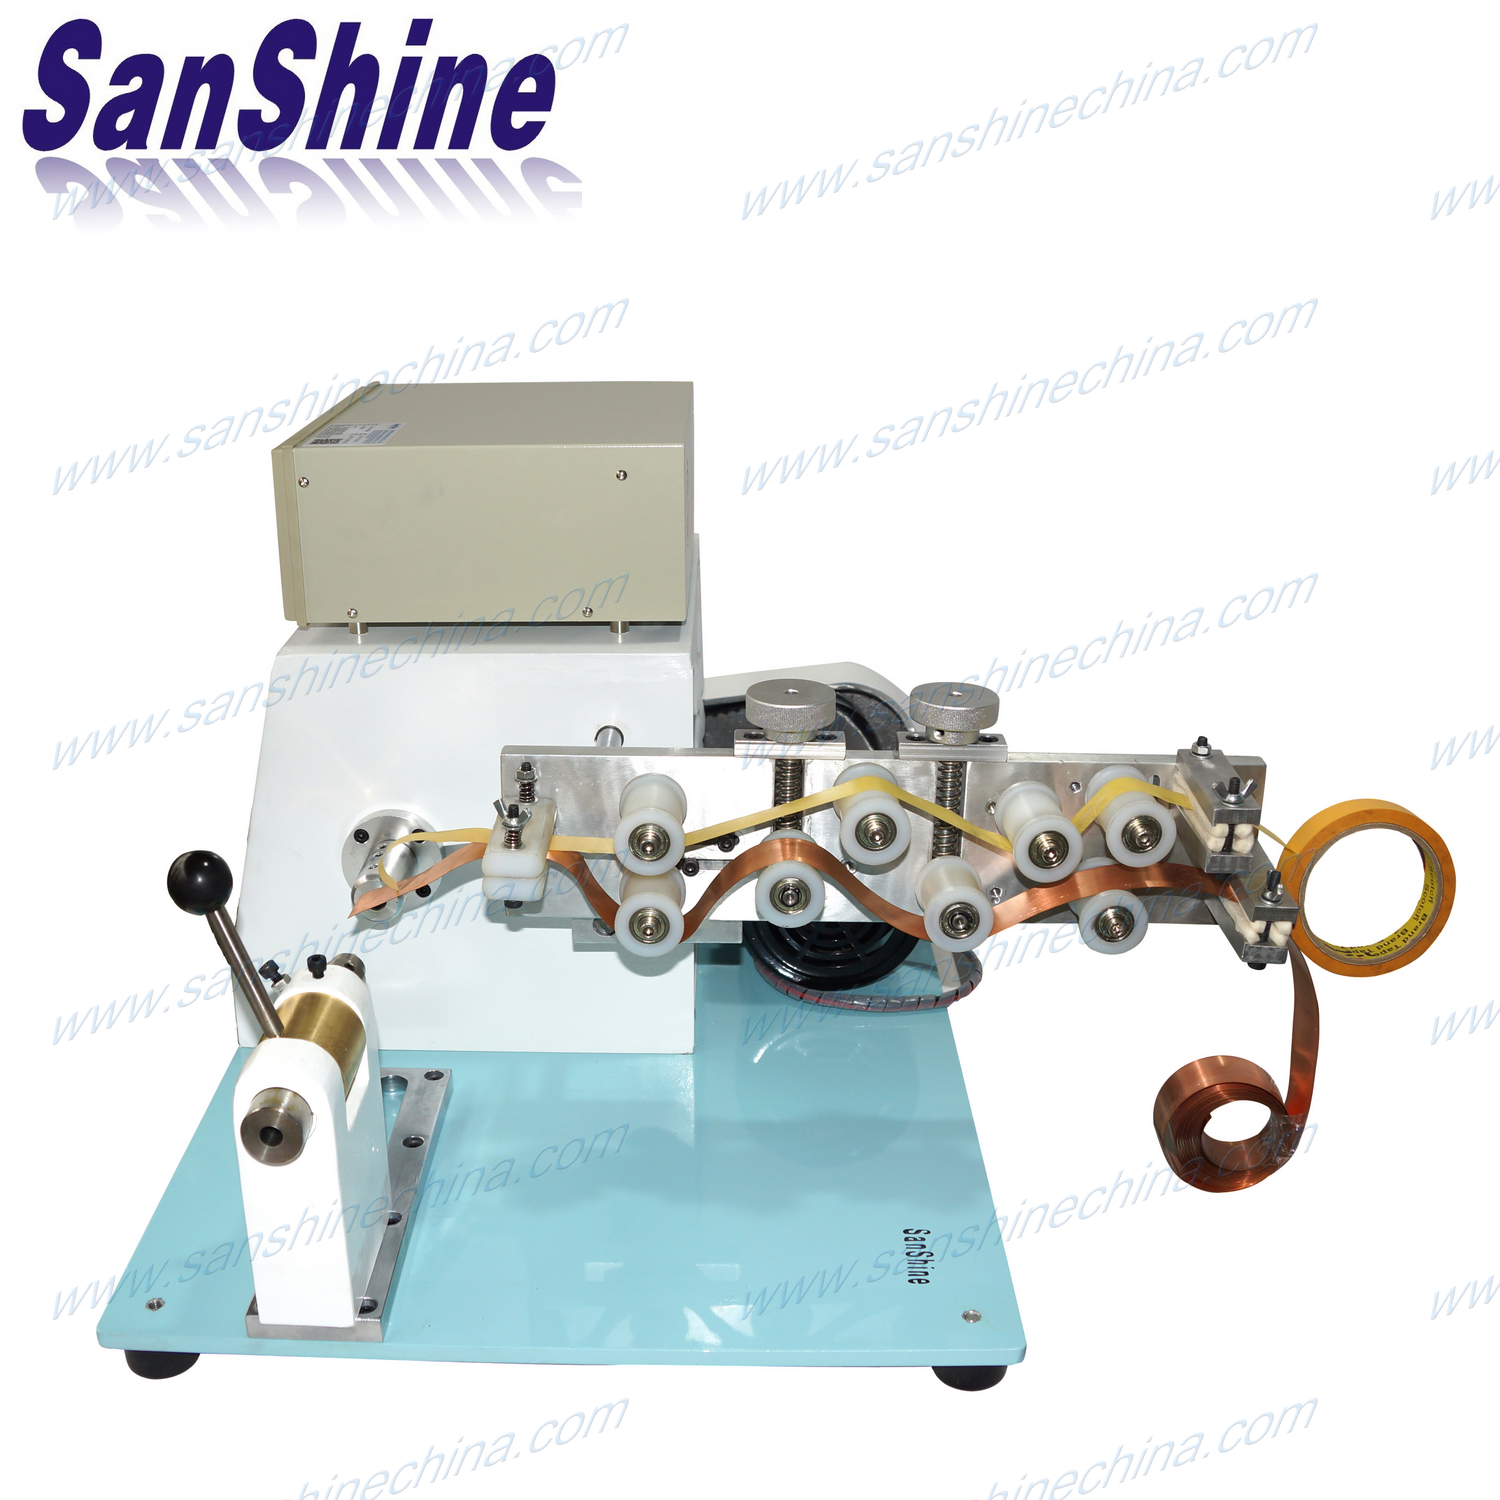 Programmable automatic copper foil coil winding machine(SS851F)